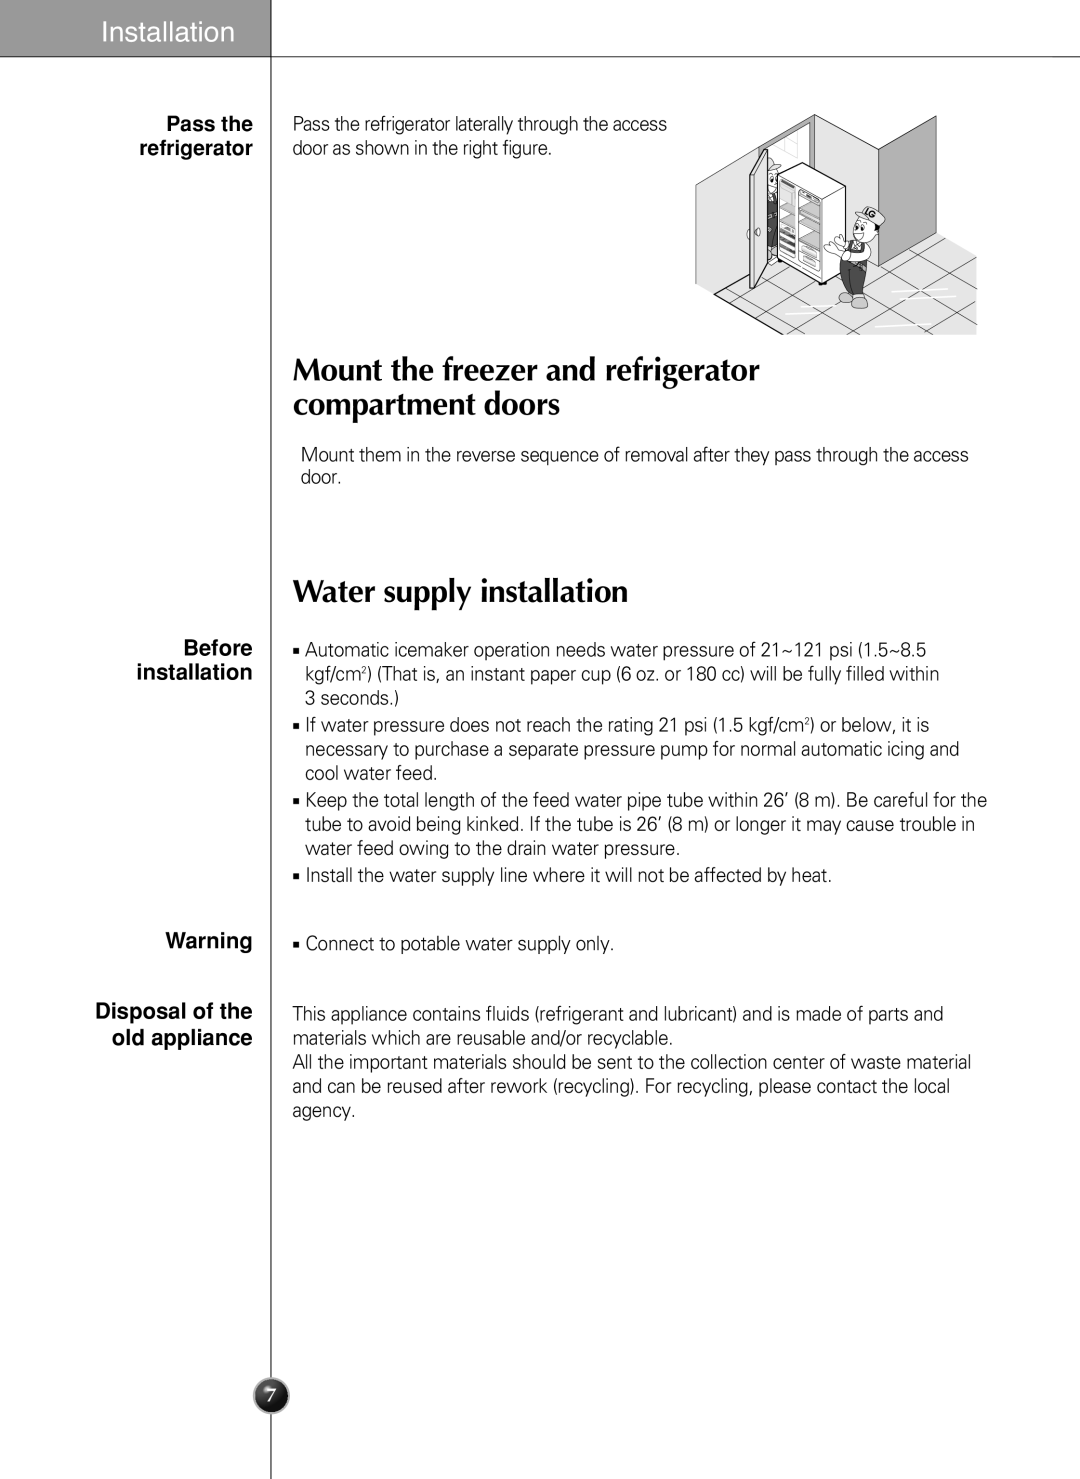 LG Electronics LSC 27960ST Water supply installation, Mount the freezer and refrigerator compartment doors, Installation 